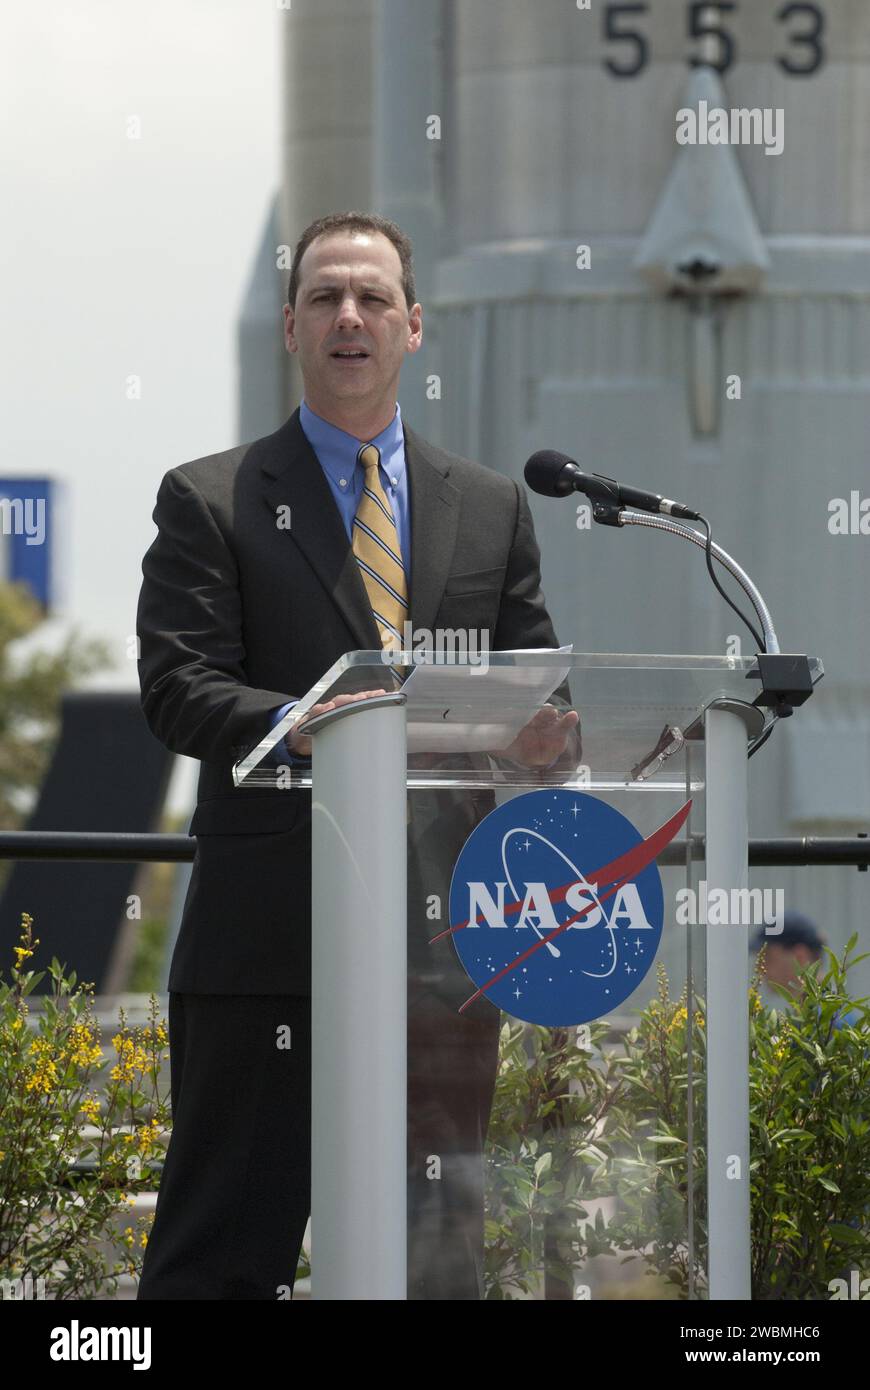 CAPE CANAVERAL, Fla. -- In the Rocket Garden at NASA's Kennedy Space Center Visitor Complex in Florida, United States Postal Service official Steve Massey addresses the audience during an event unveiling two new stamps that commemorate the 50th anniversary of human spaceflight from the United States Postal Service.     One stamp commemorates NASA's Project Mercury and Alan Shepard's historic launch on May 5, 1961, aboard the spacecraft Freedom 7. The second stamp honors NASA's MESSENGER, which reached Mercury in March to become the first spacecraft to orbit the planet. The two missions frame a Stock Photo